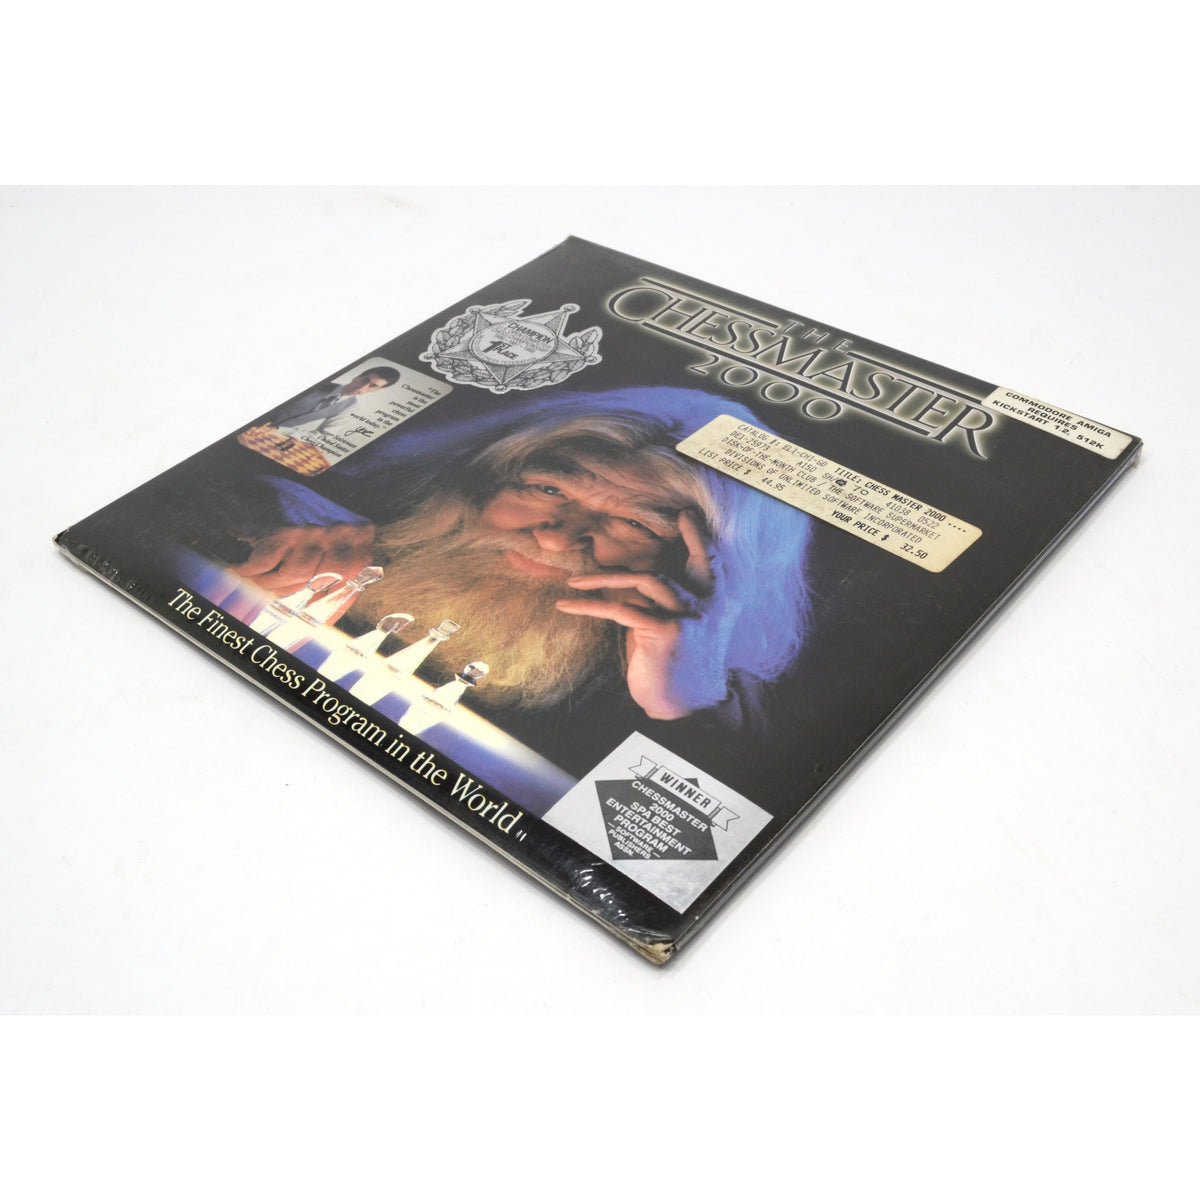 Brand New! AMIGA GAME THE CHESSMASTER 2000 Disk of Month Club